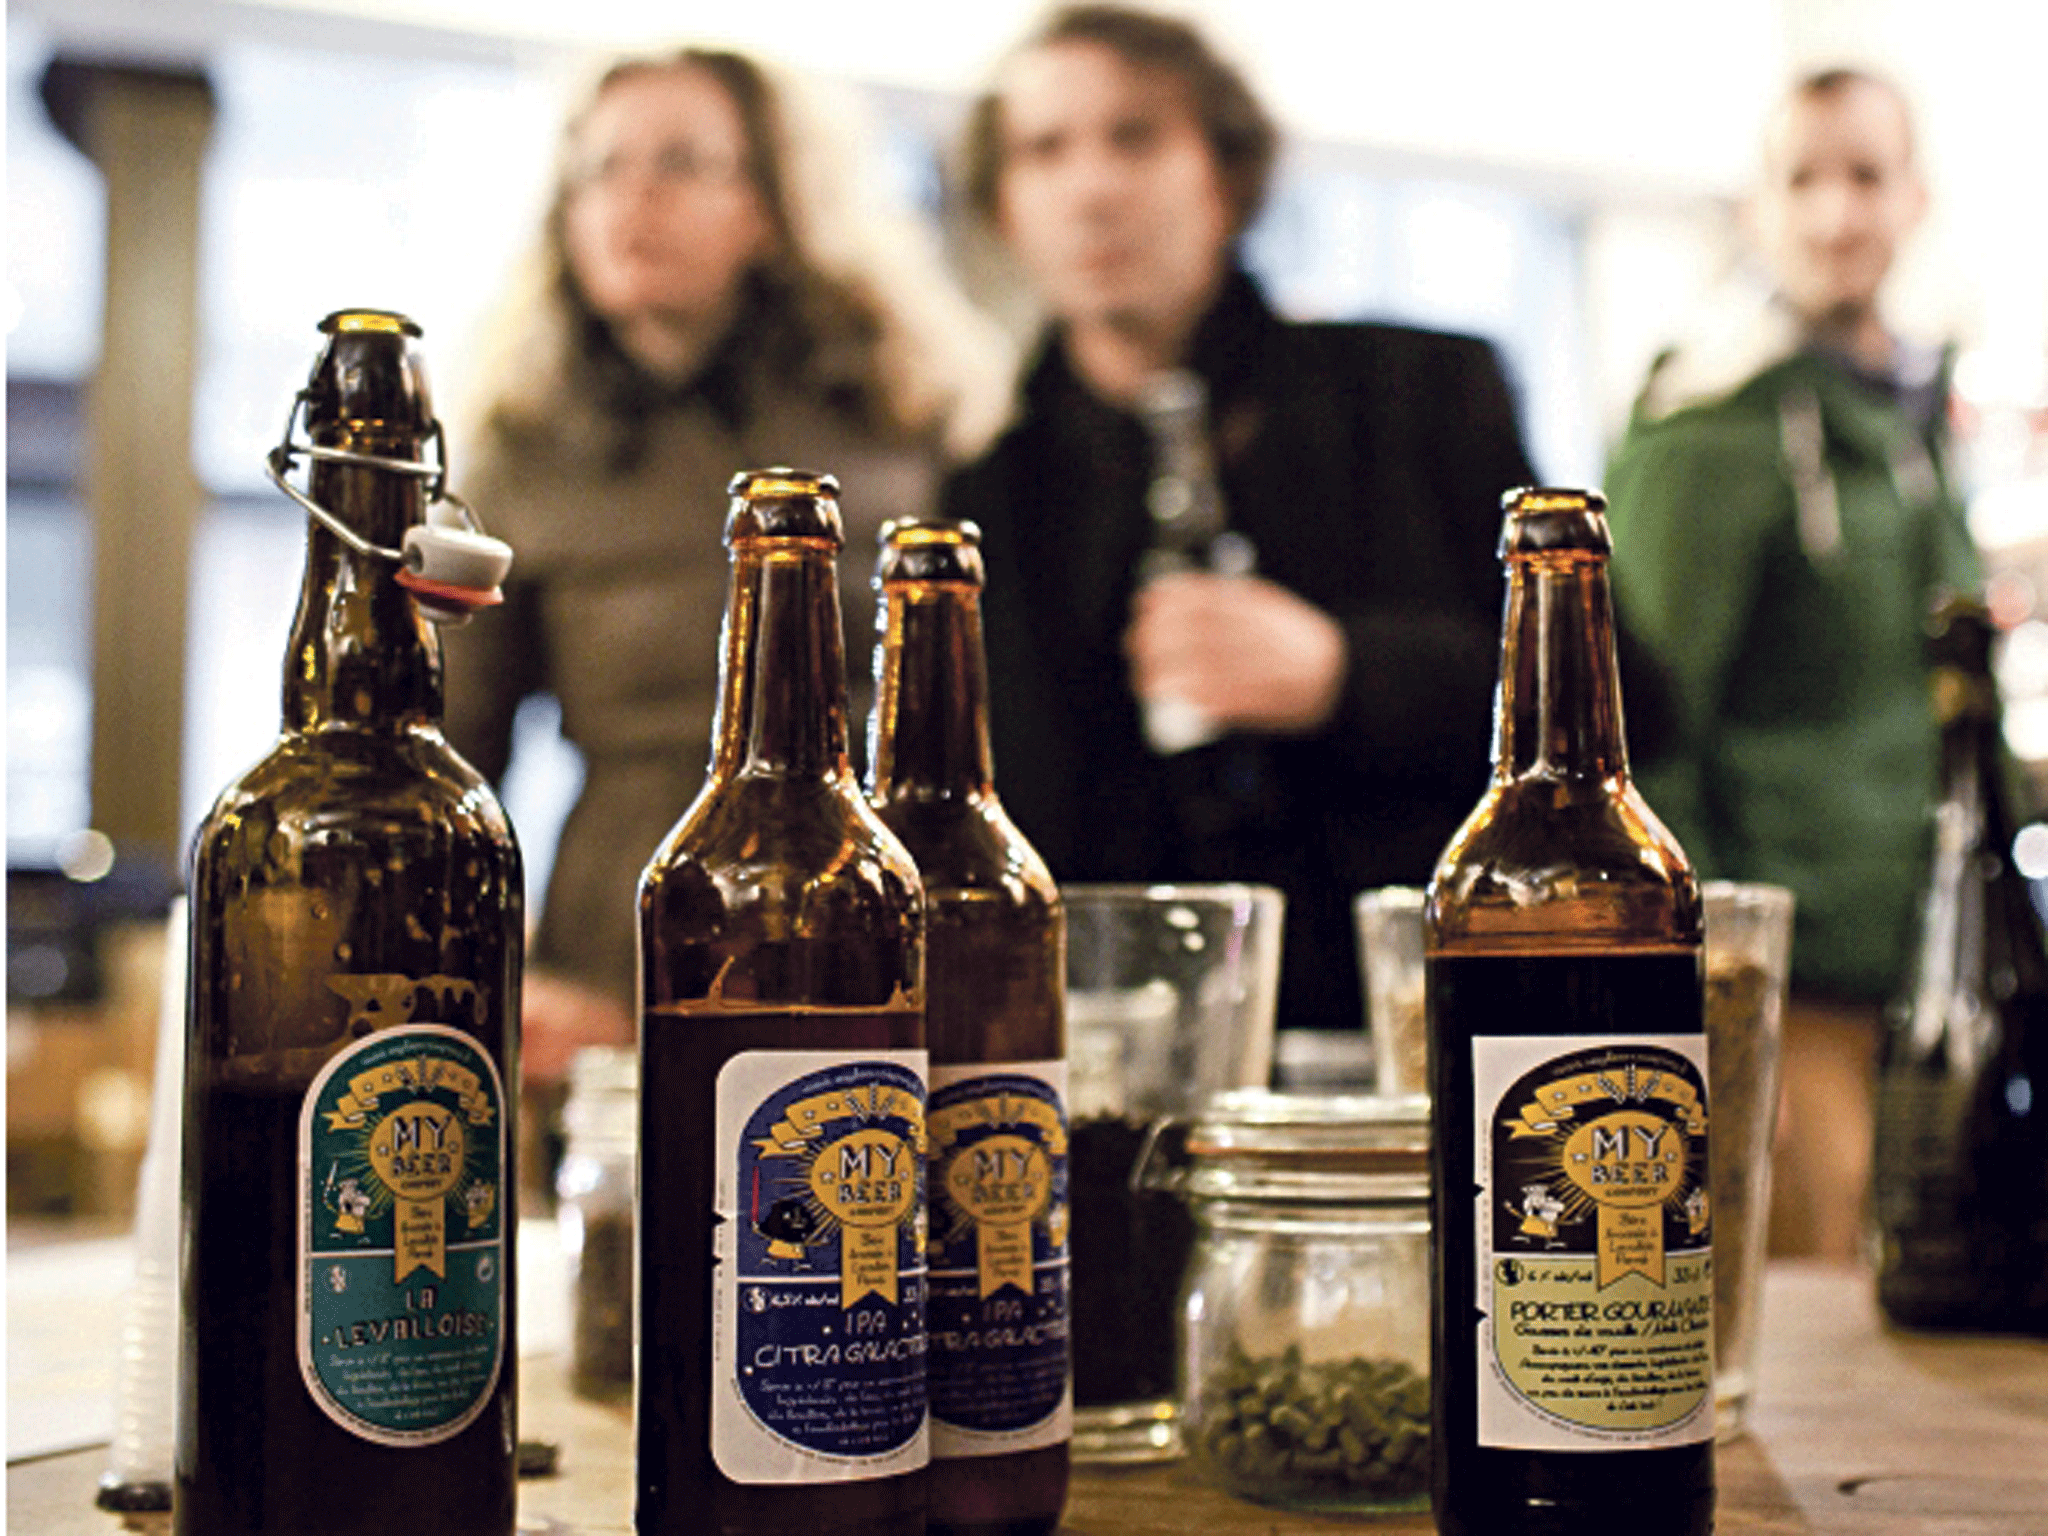 Brew year: Paris has seen a rise in artisanal beer pubs